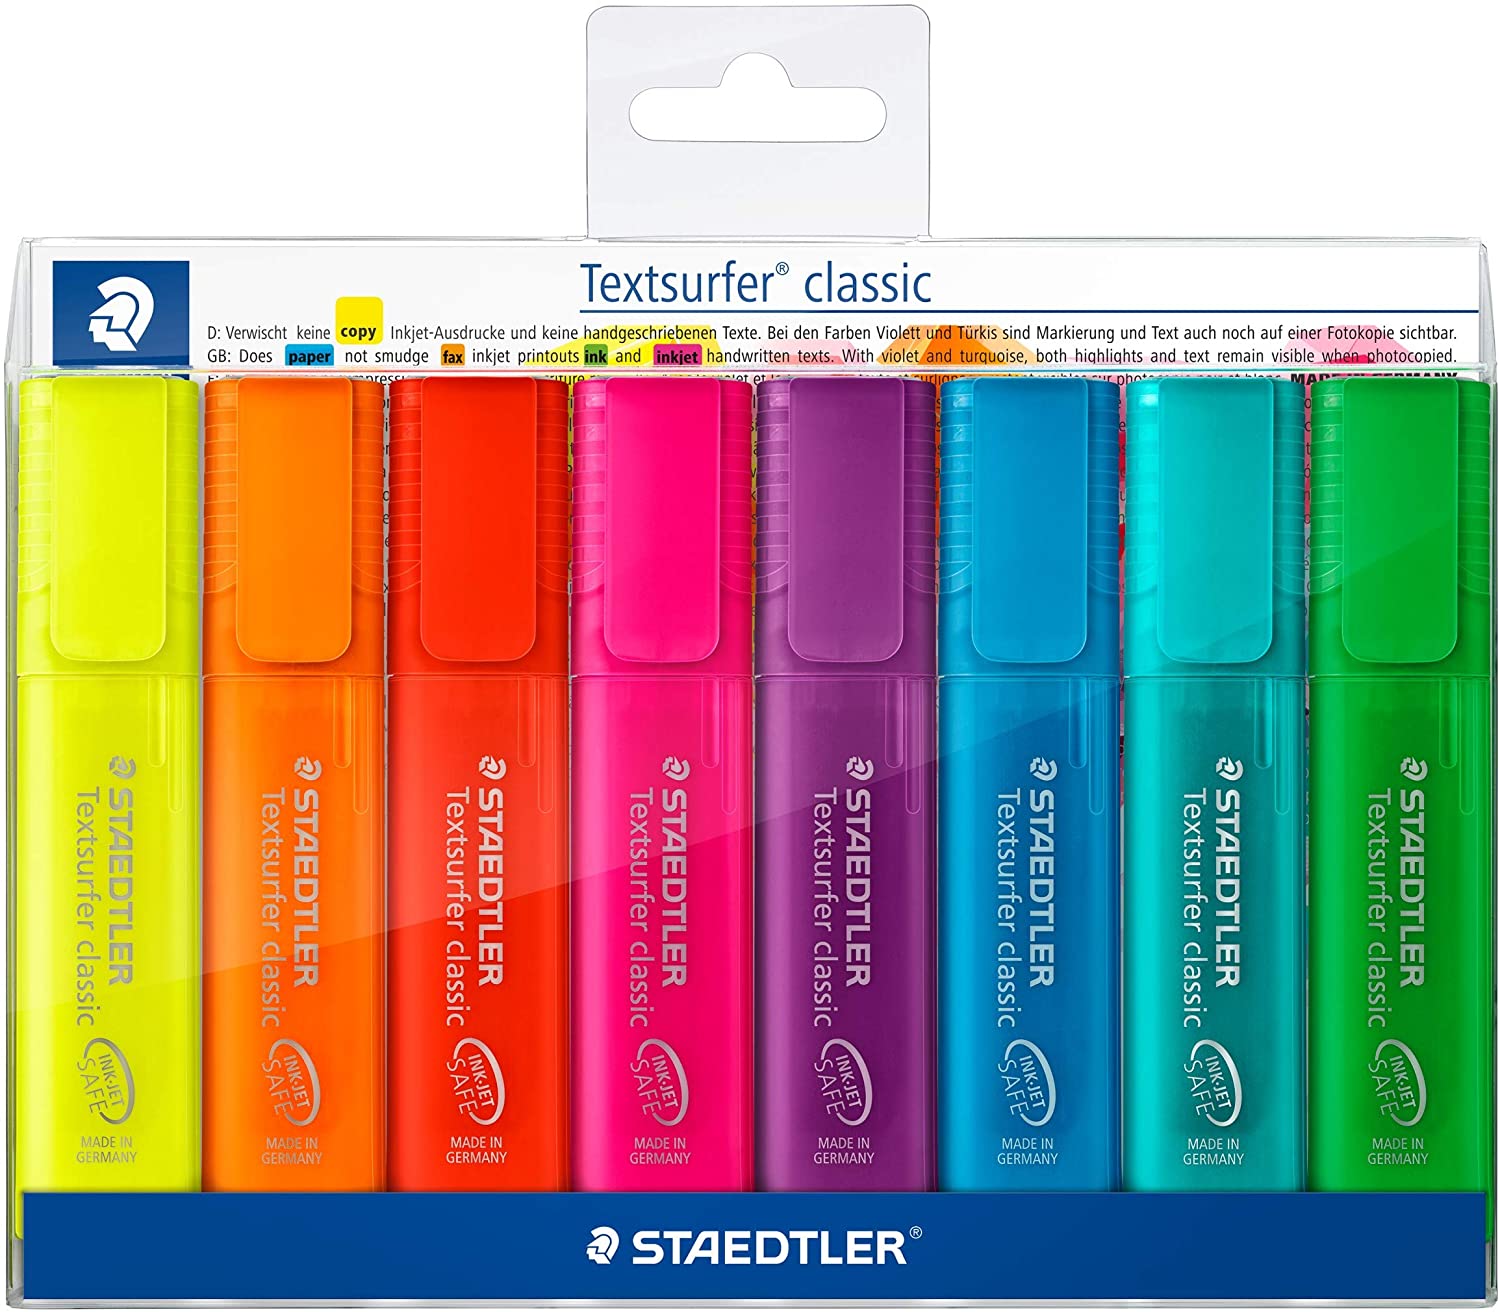 Staedtler -8 colors Textsurfer Classic Highlighters